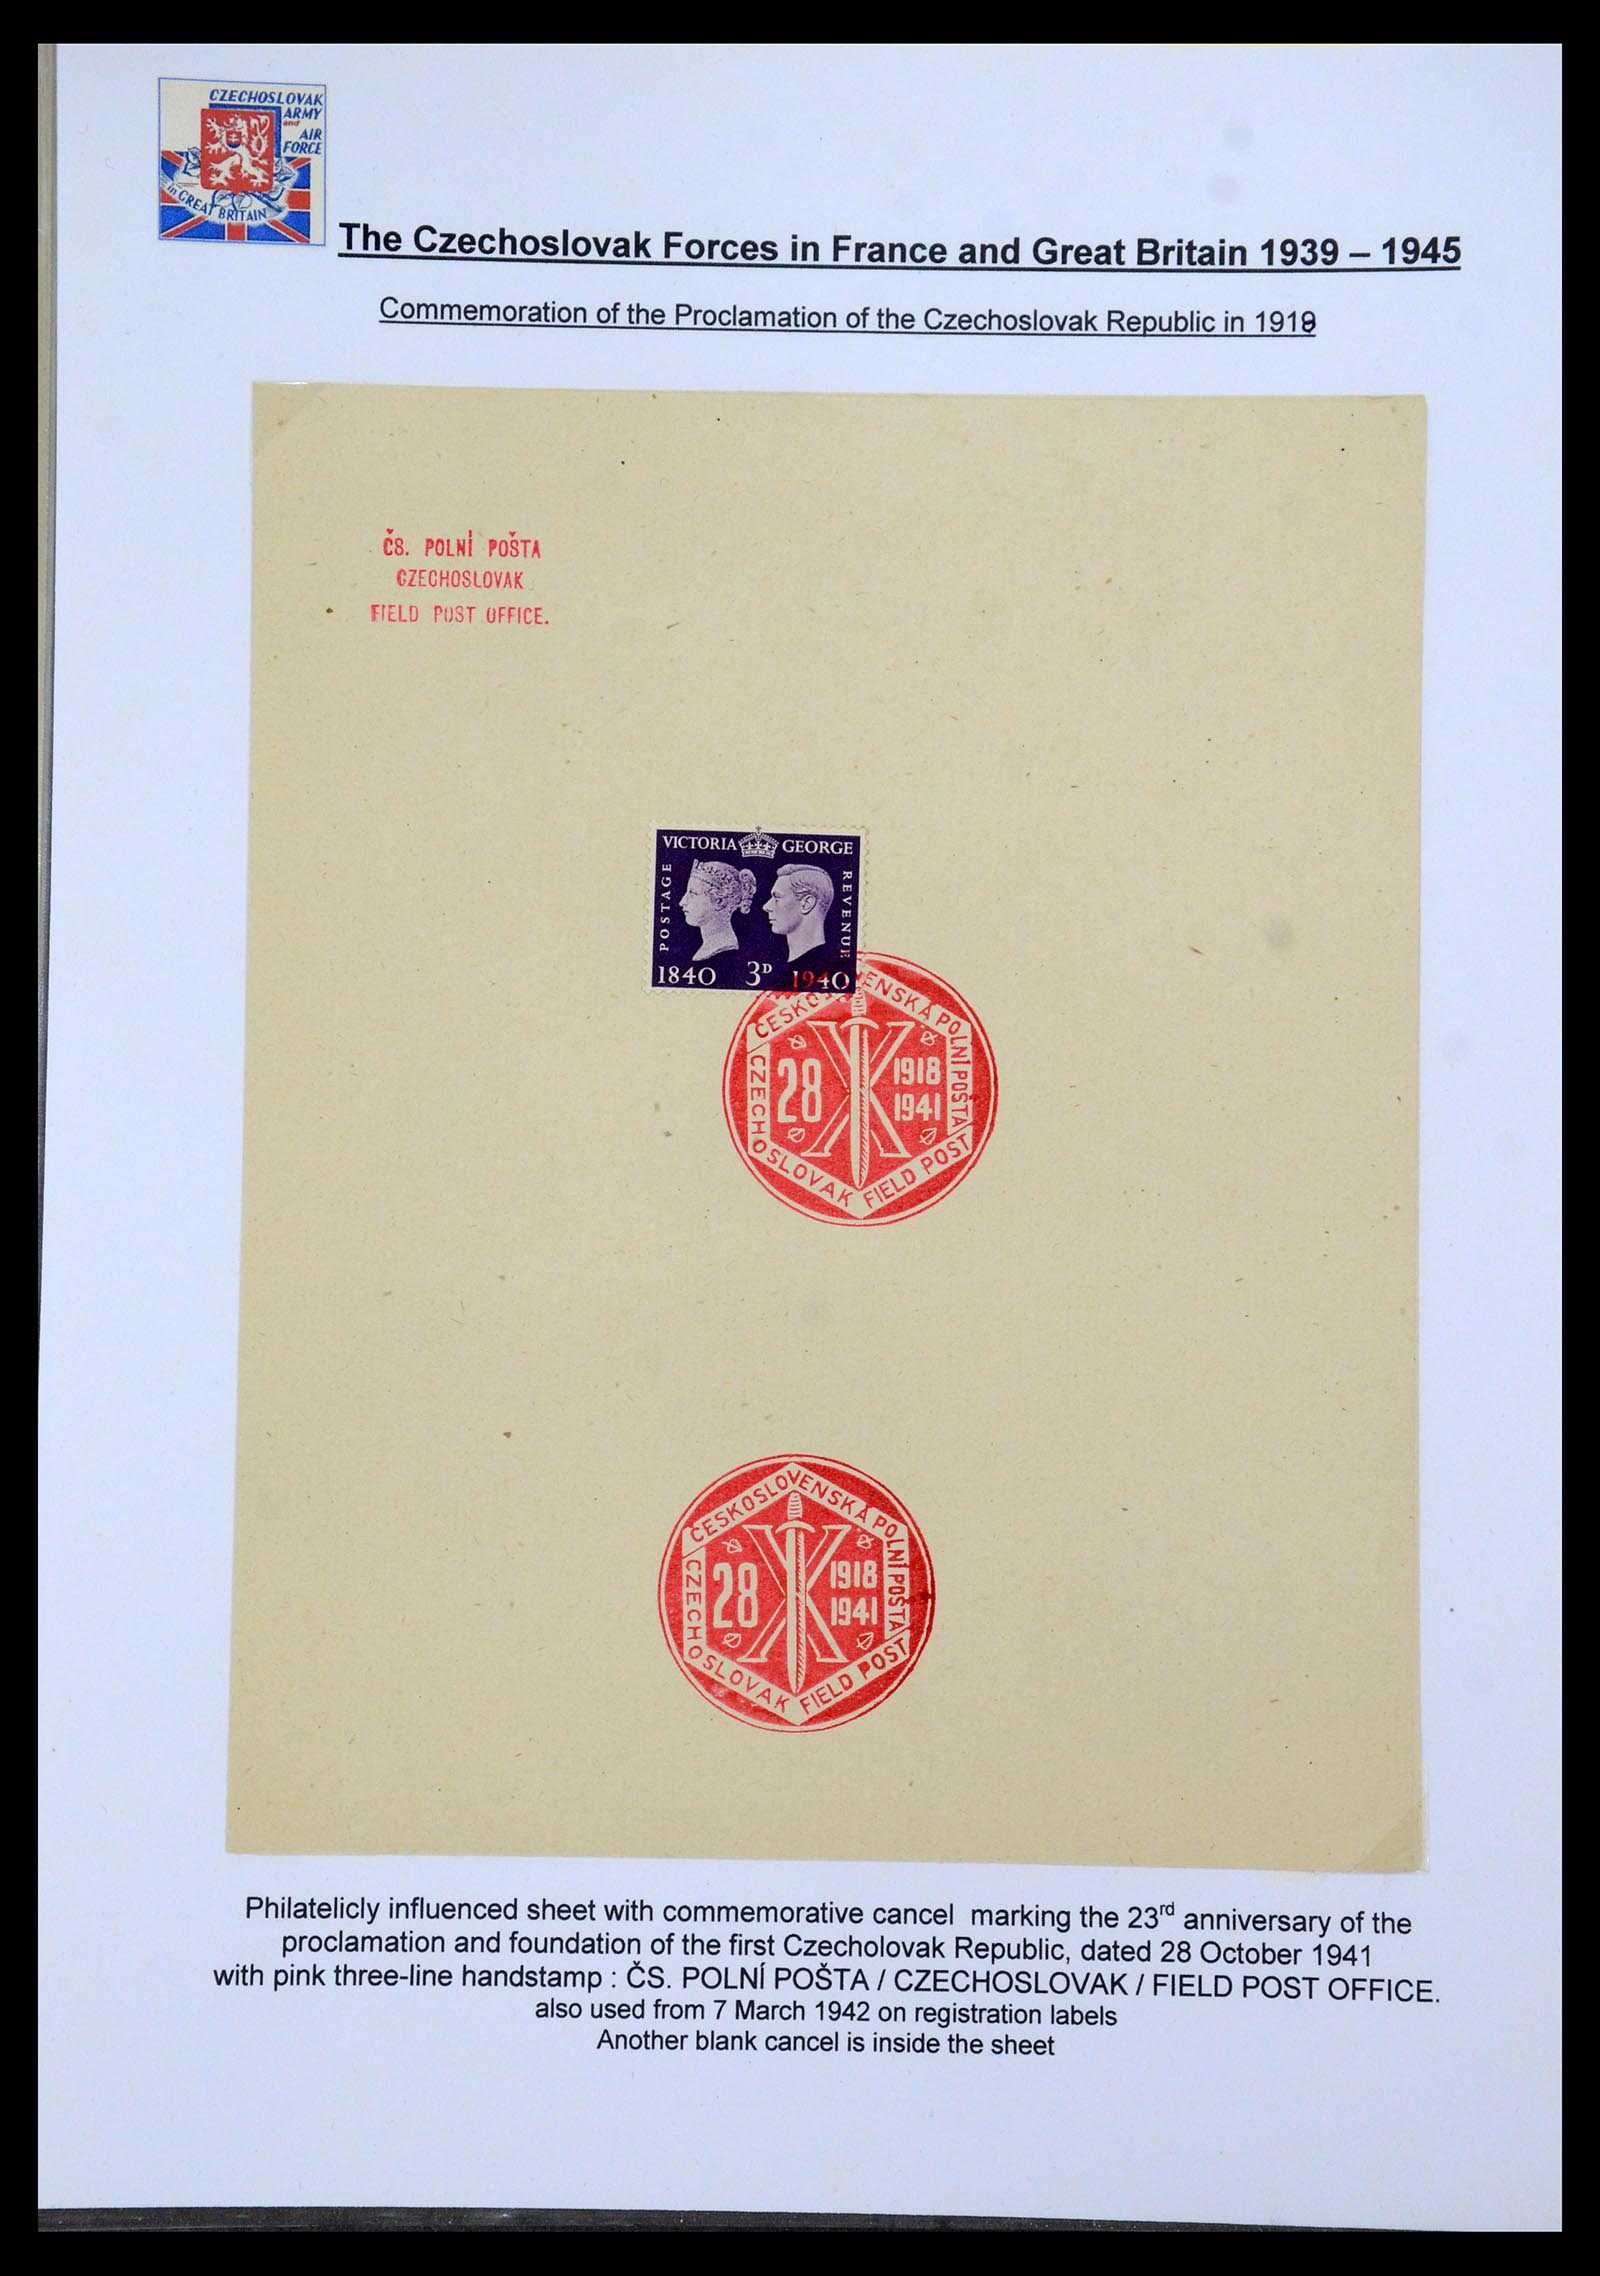 35574 053 - Stamp Collection 35574 Czechoslovak forces in France and Great Britain 1